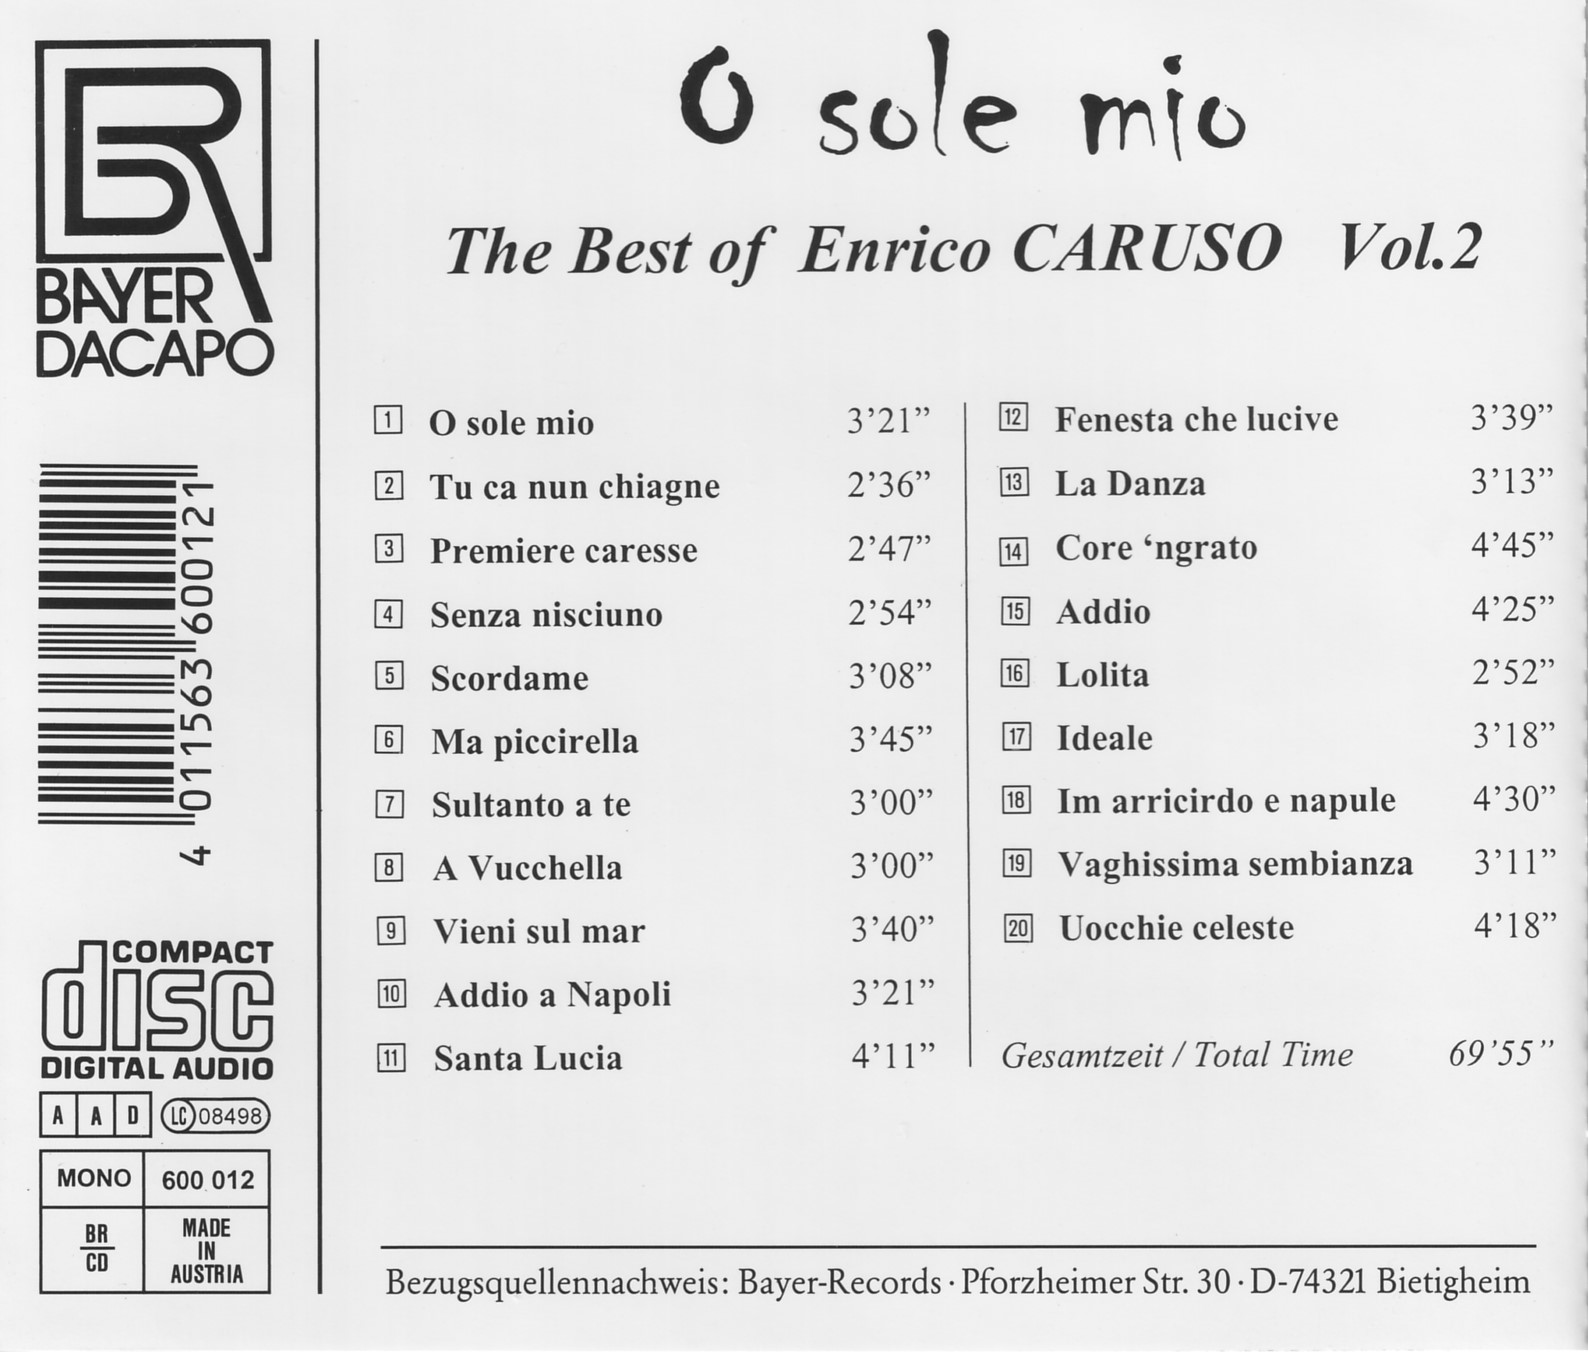 The Best of Enrico Caruso Vol.2